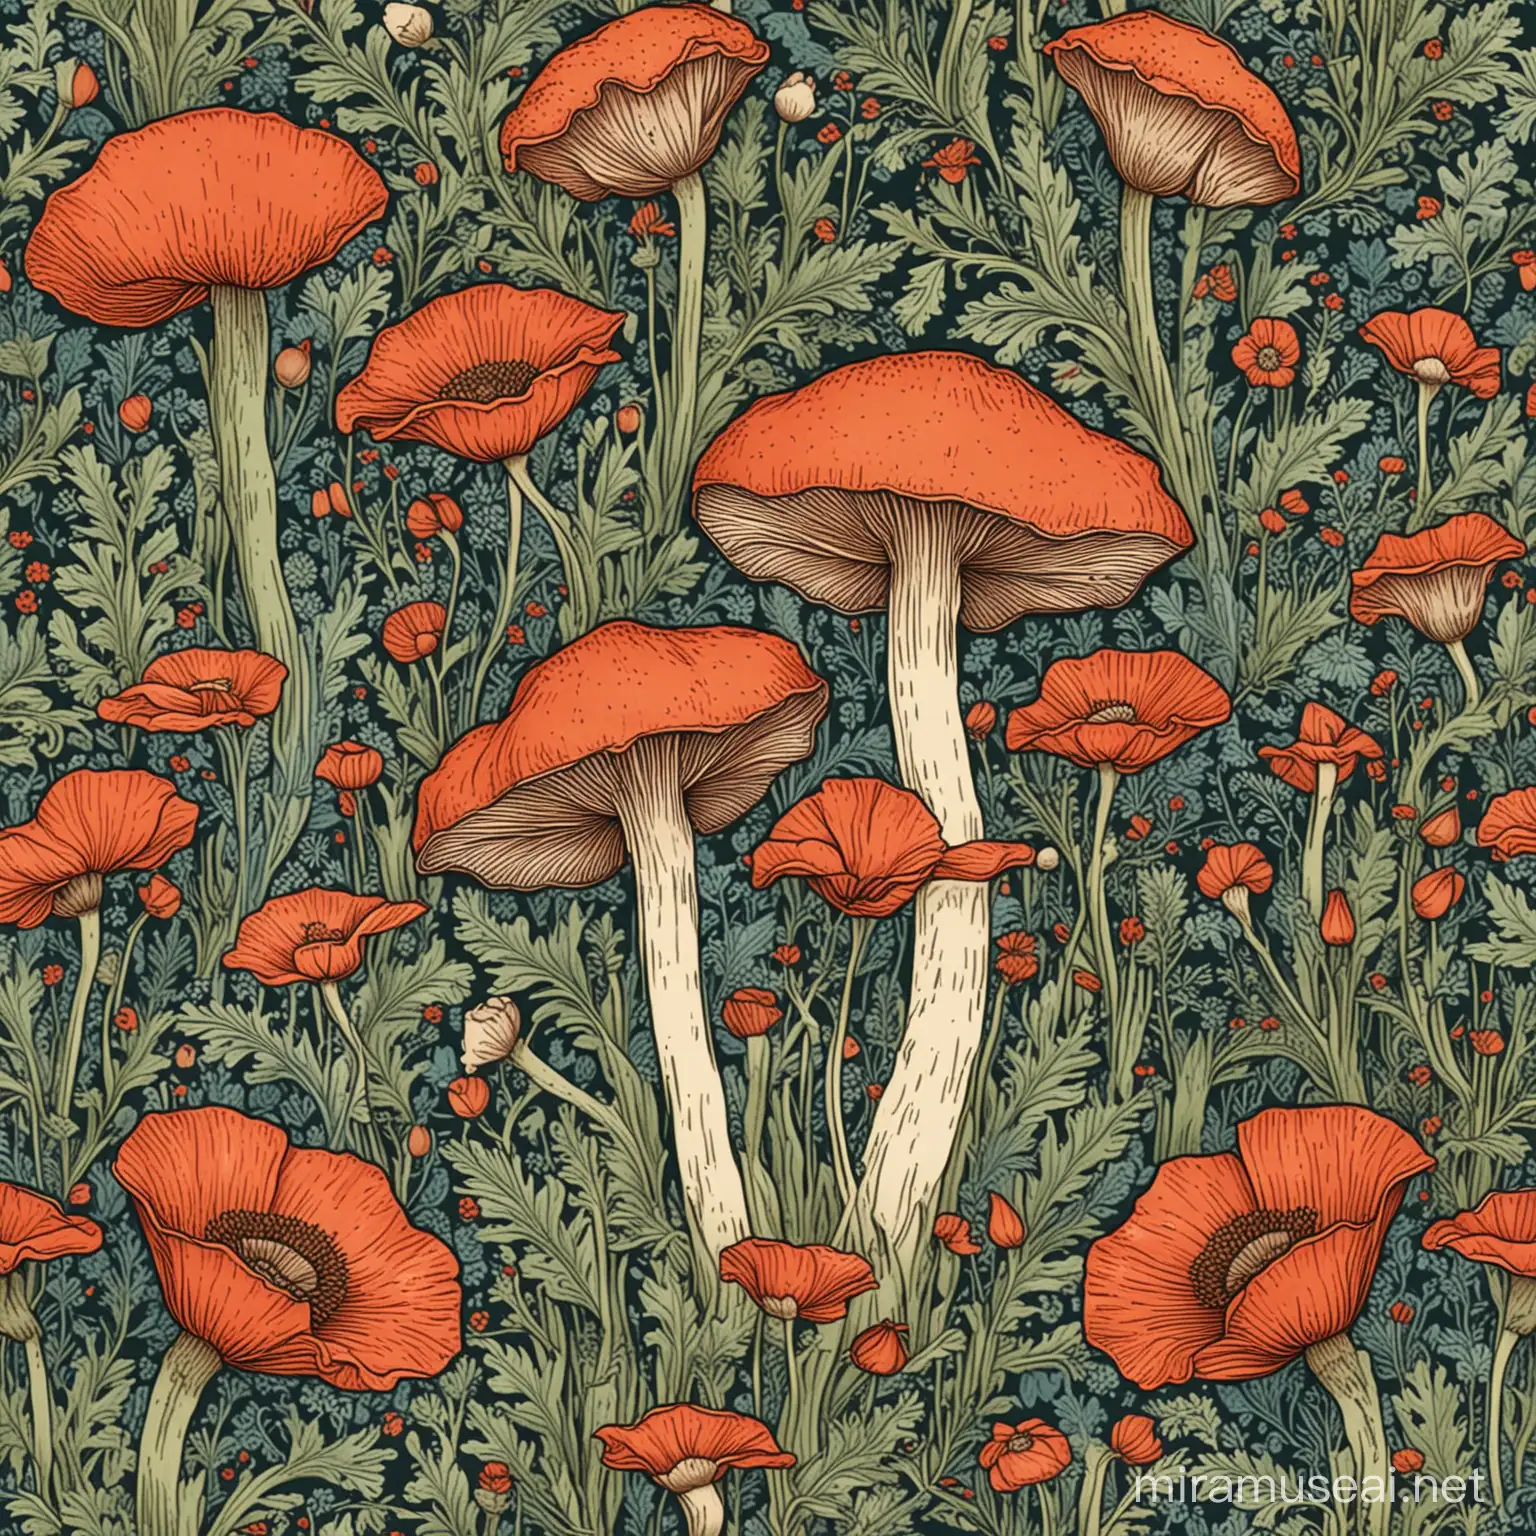 mushroom and poppies illustration in the style of william morris